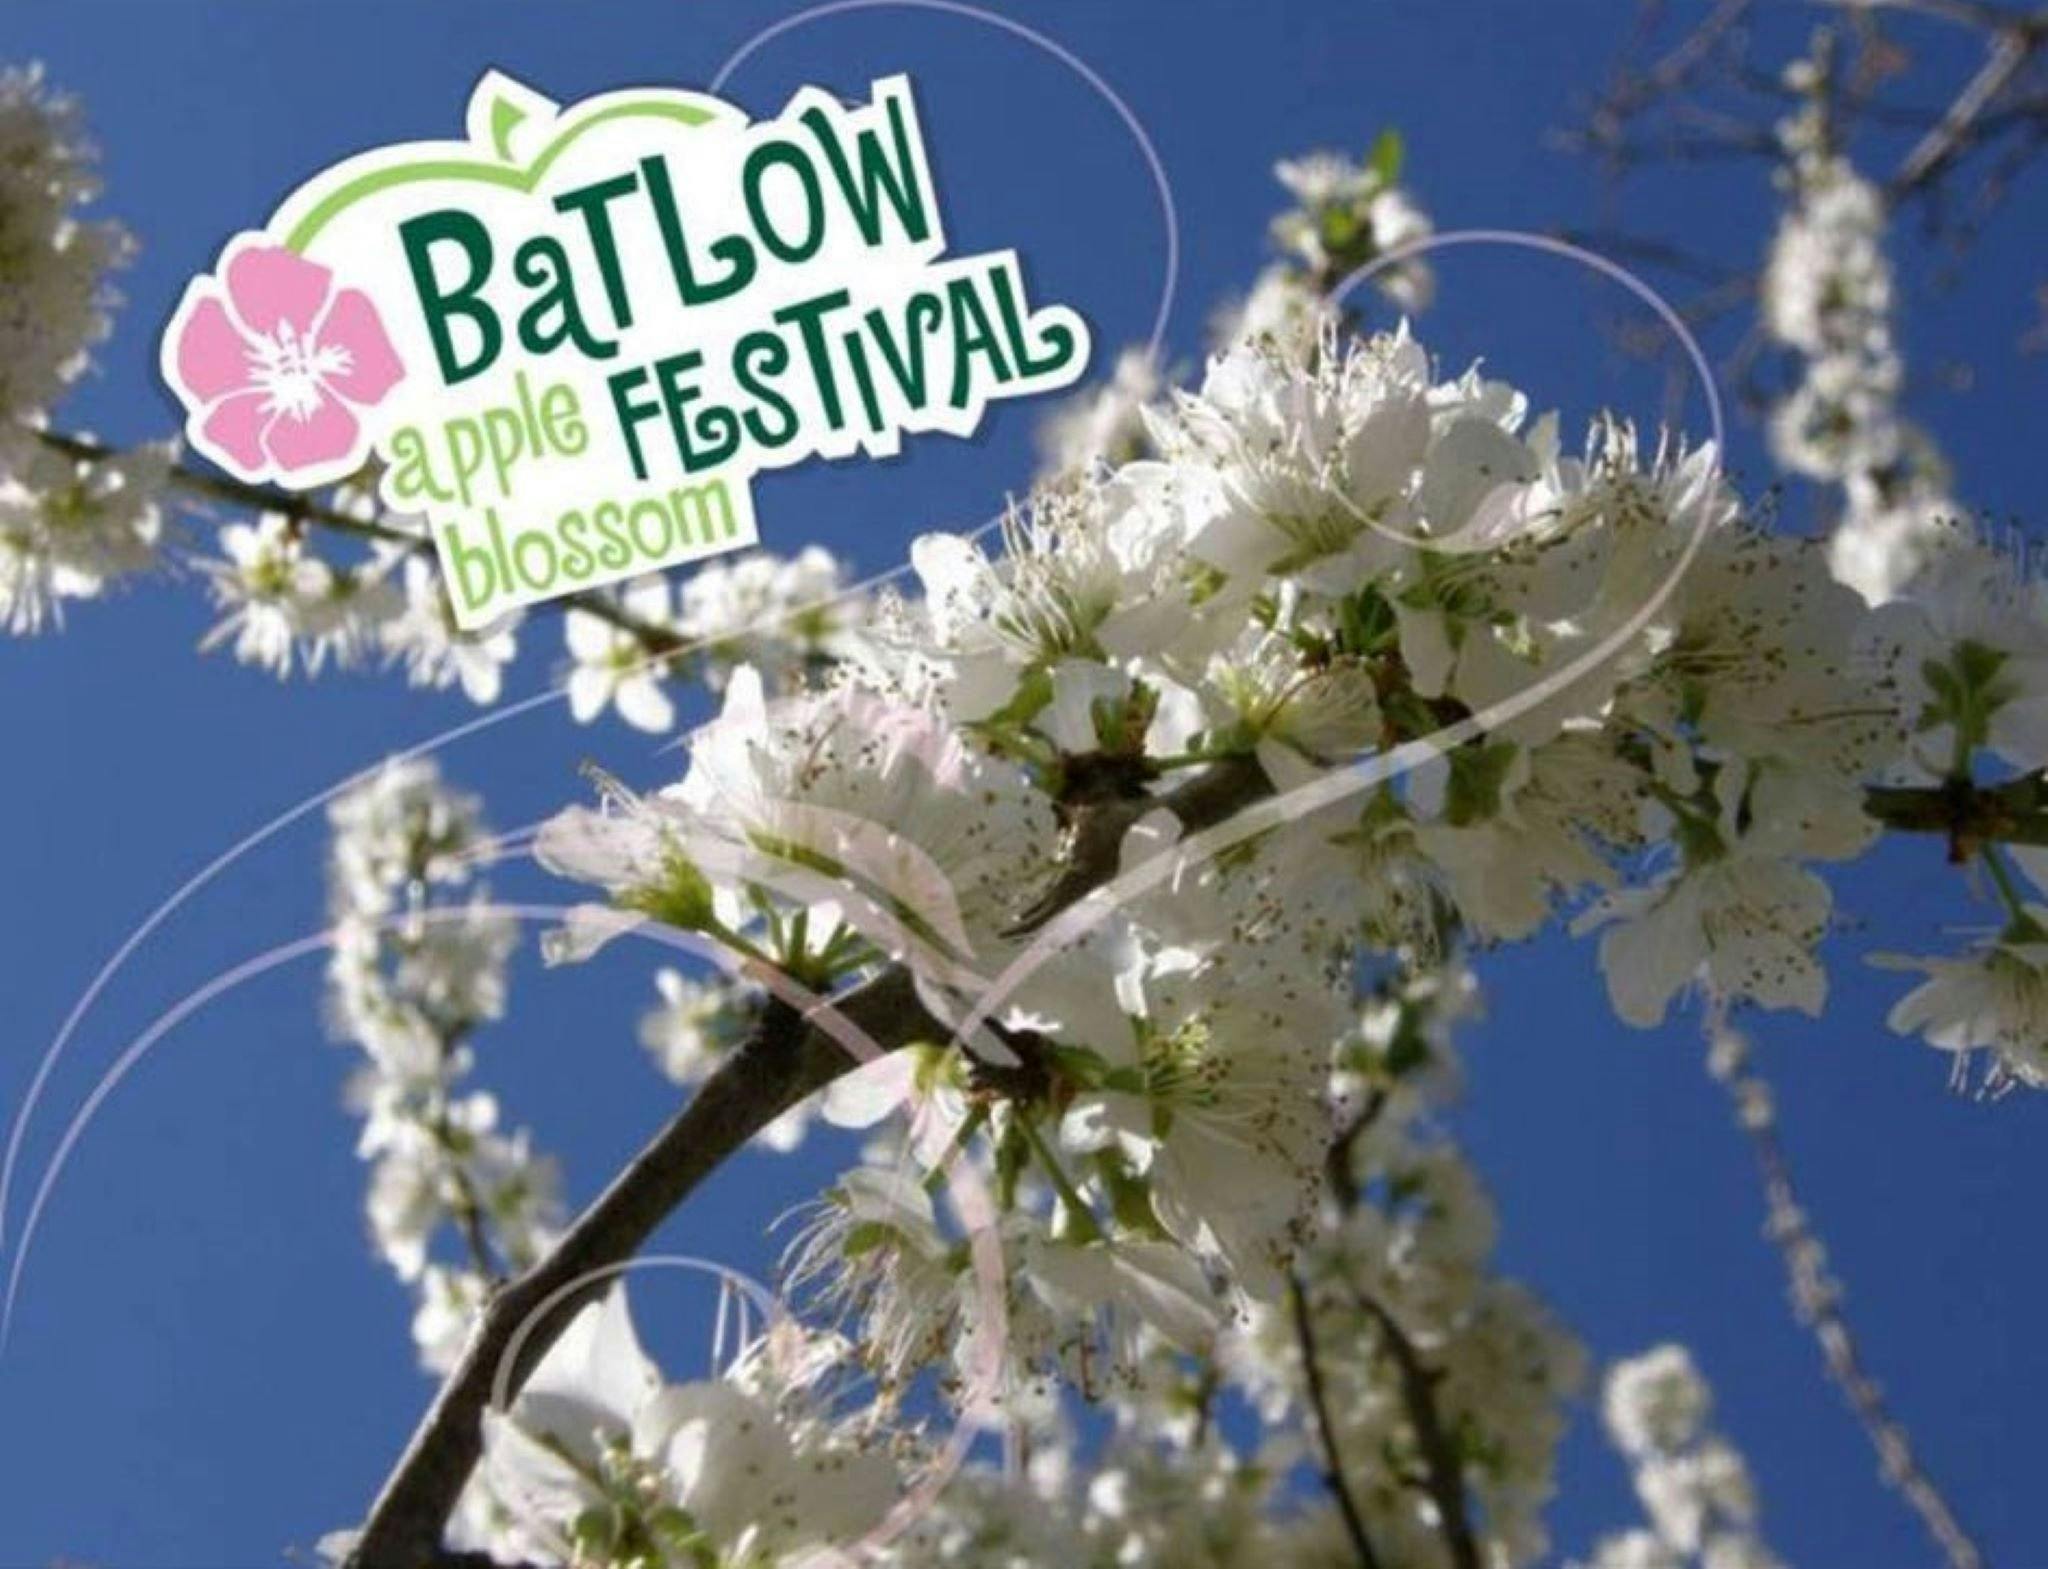 Batlow Apple Blossom Festival NSW Holidays & Things to